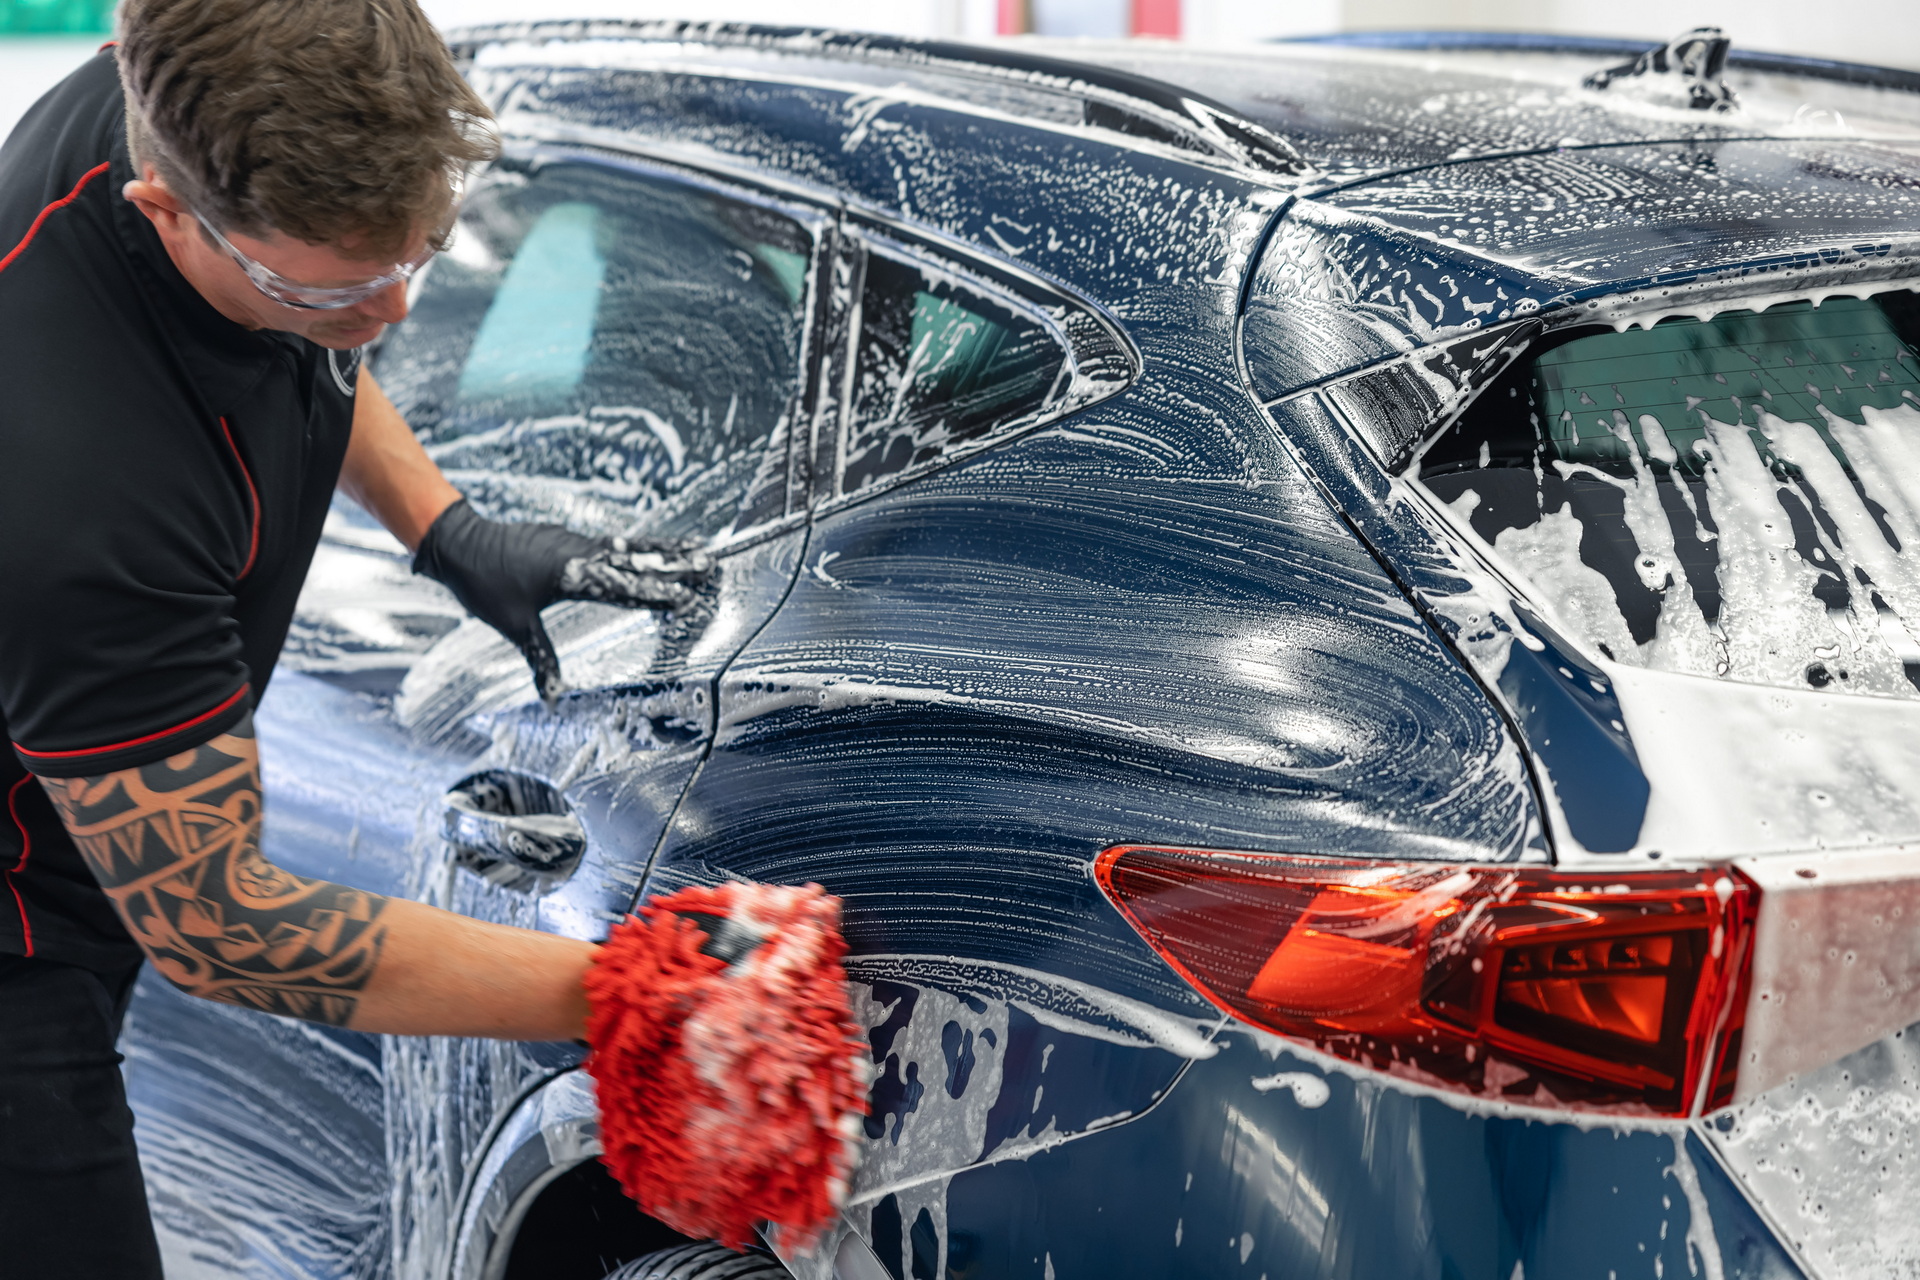 How To: Efficiently Wash, Decontaminate & Protect your car with